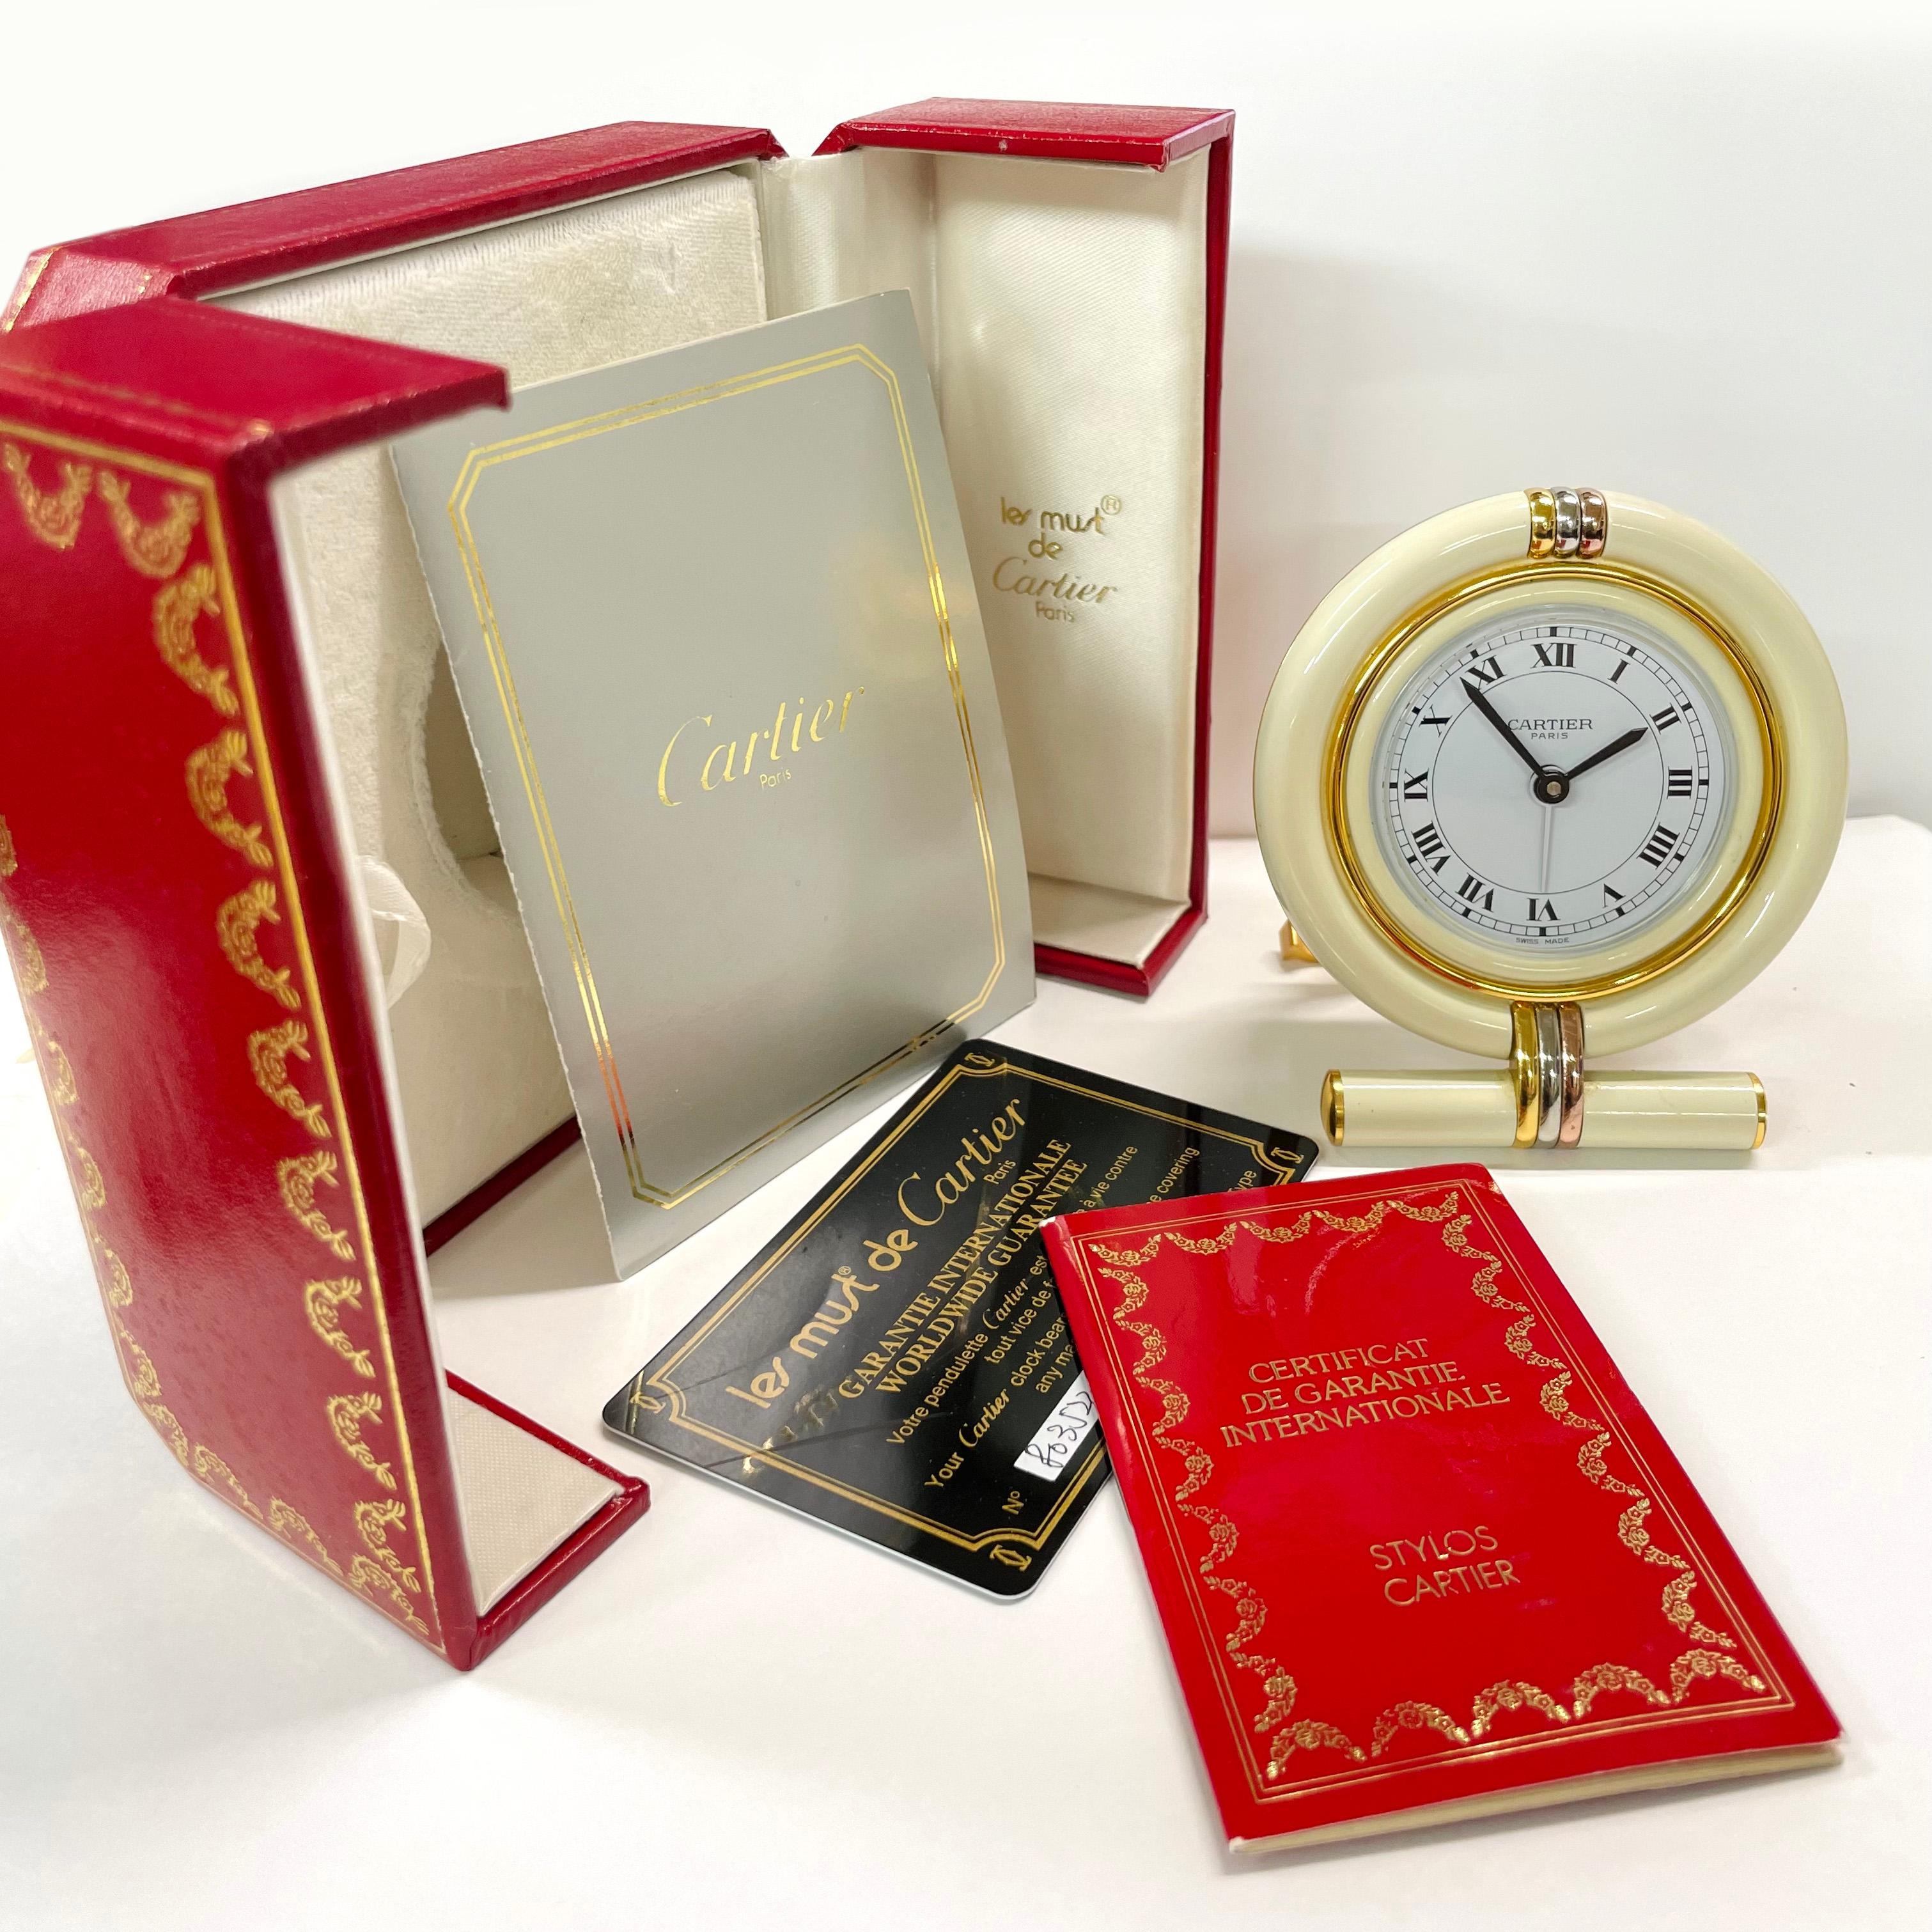 Les Must de Cartier Paris Enamel Gold Plated Travel Clock with original case and manual. This beautiful and practical travel alarm clock has a quartz Swiss movement with Cartier C's on the bottom of the stand and cream colored overall enamel with